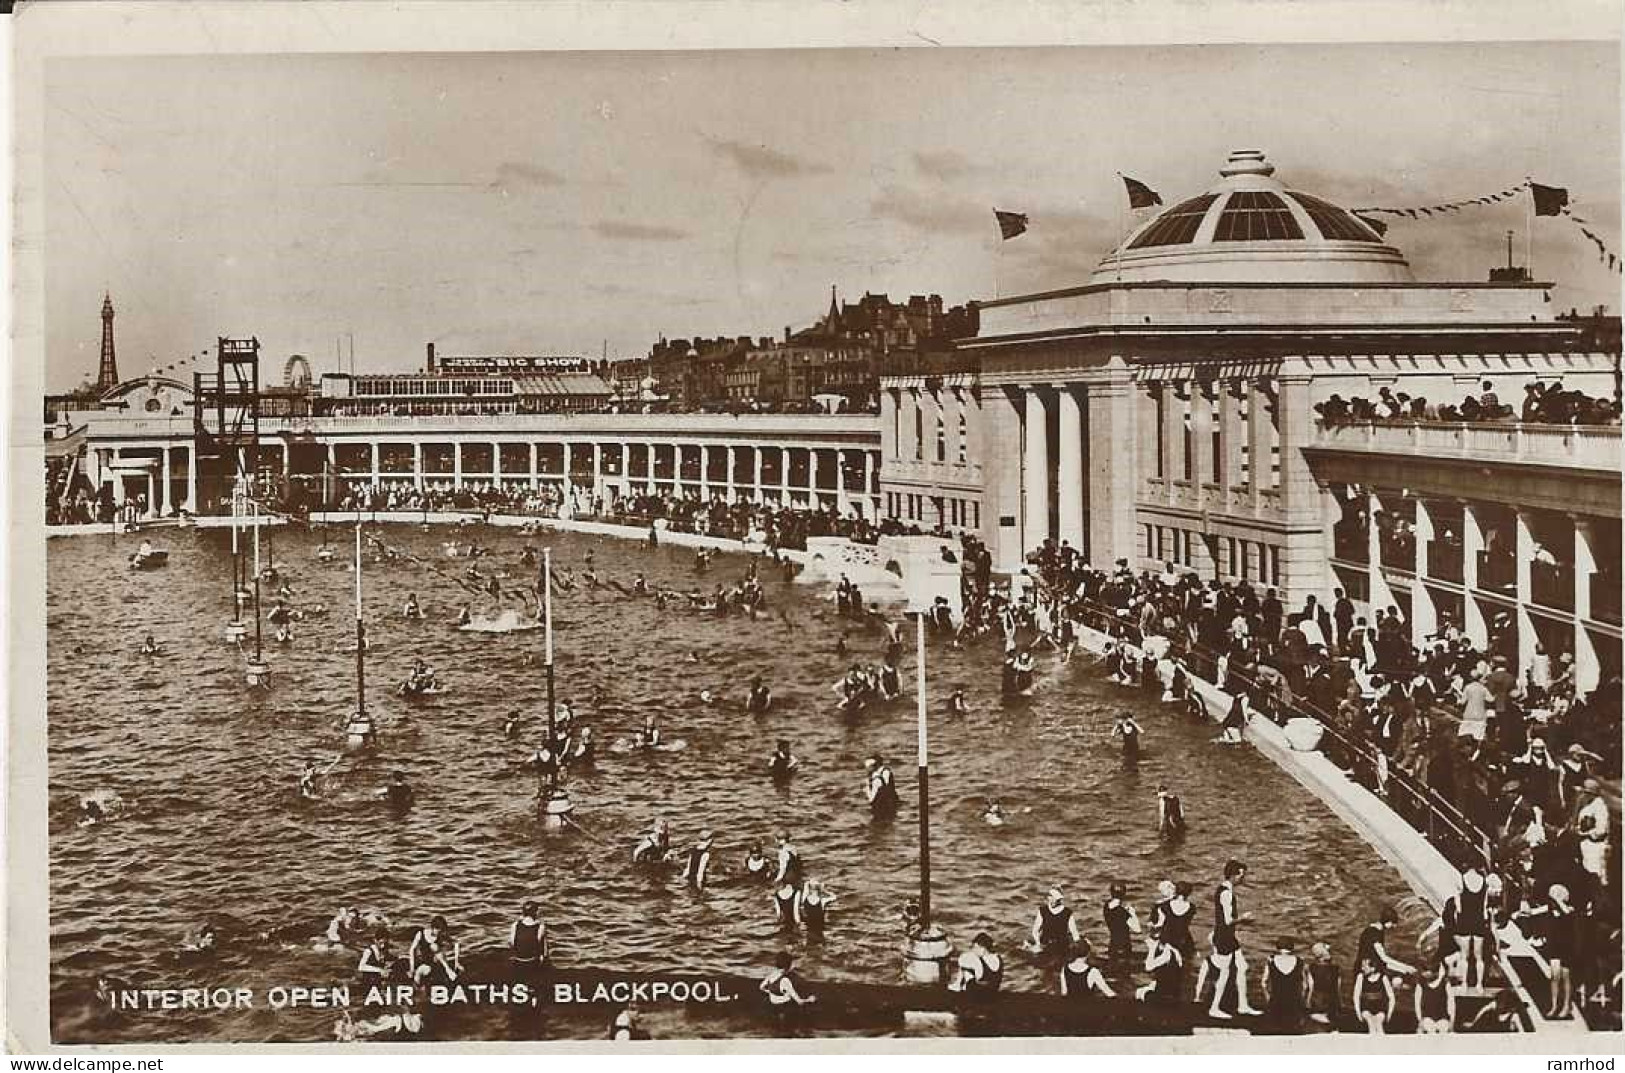 BLACKPOOL, Interior Open Air Baths (Publisher - Unknown) Date - July 1927, Used (Vintage, Real Photograph) - Blackpool